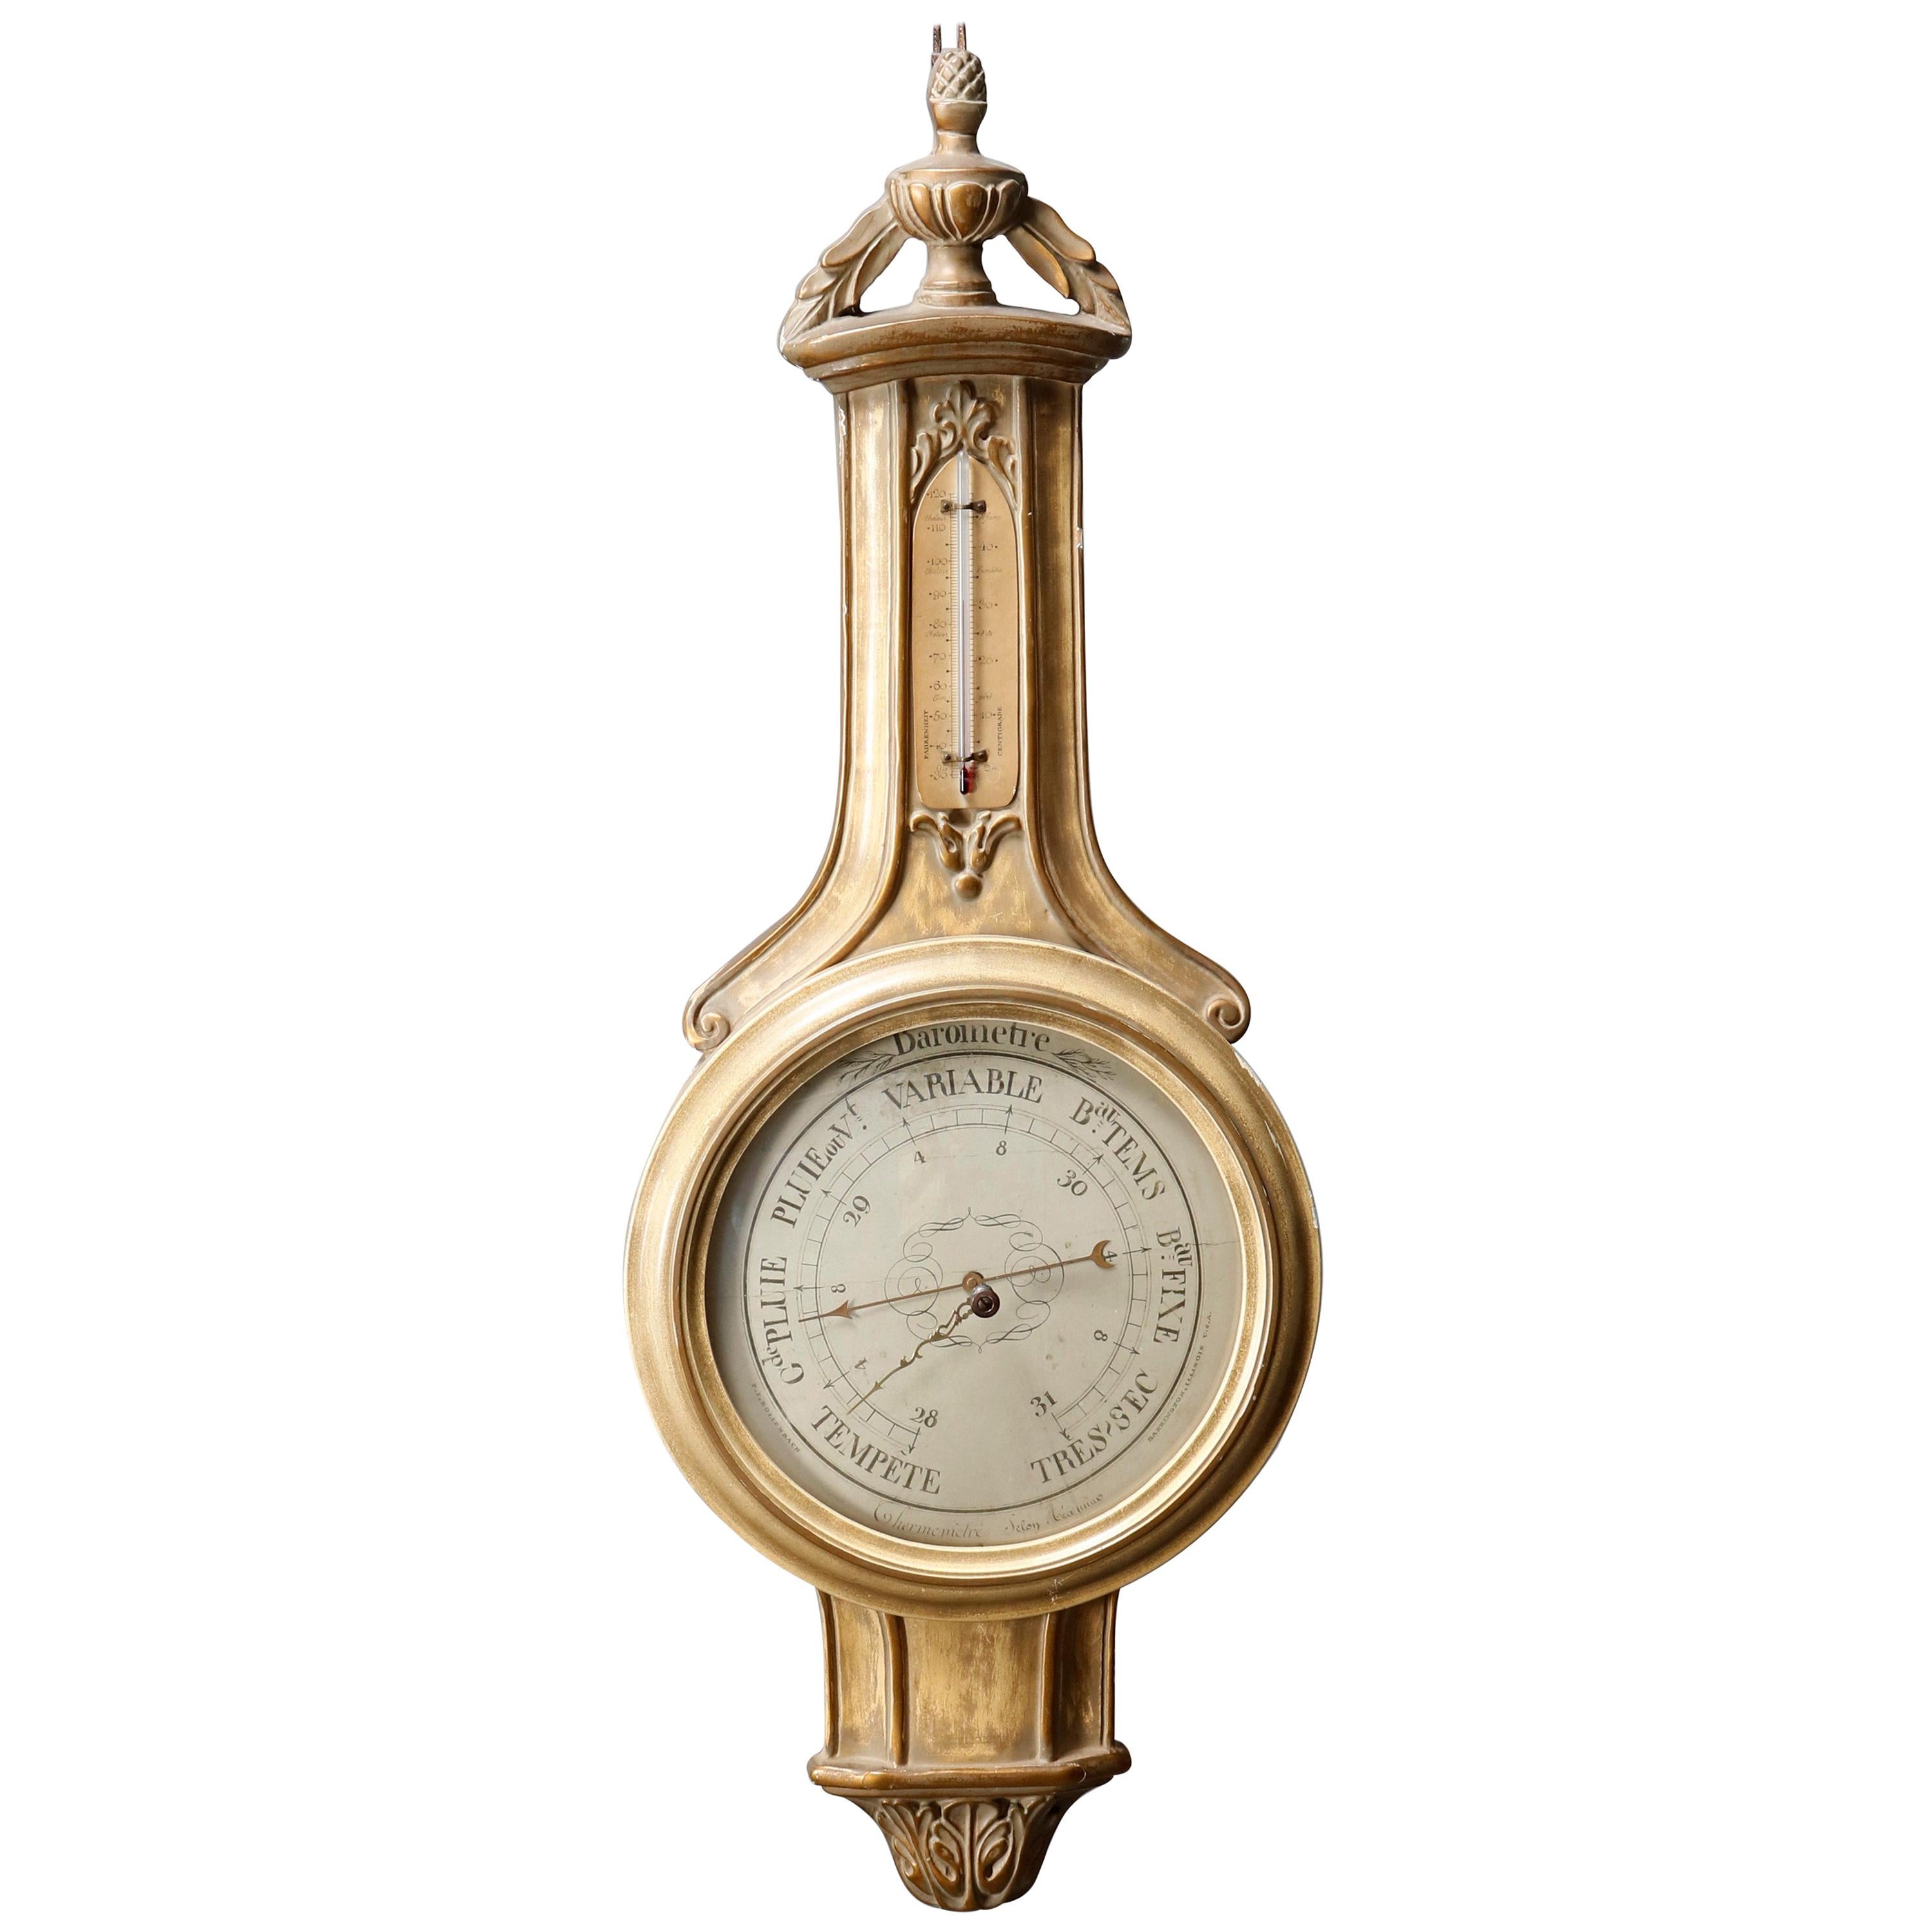 Contemporary French Neoclassical Styled Wall Barometer, Bollenbach, 20th Century